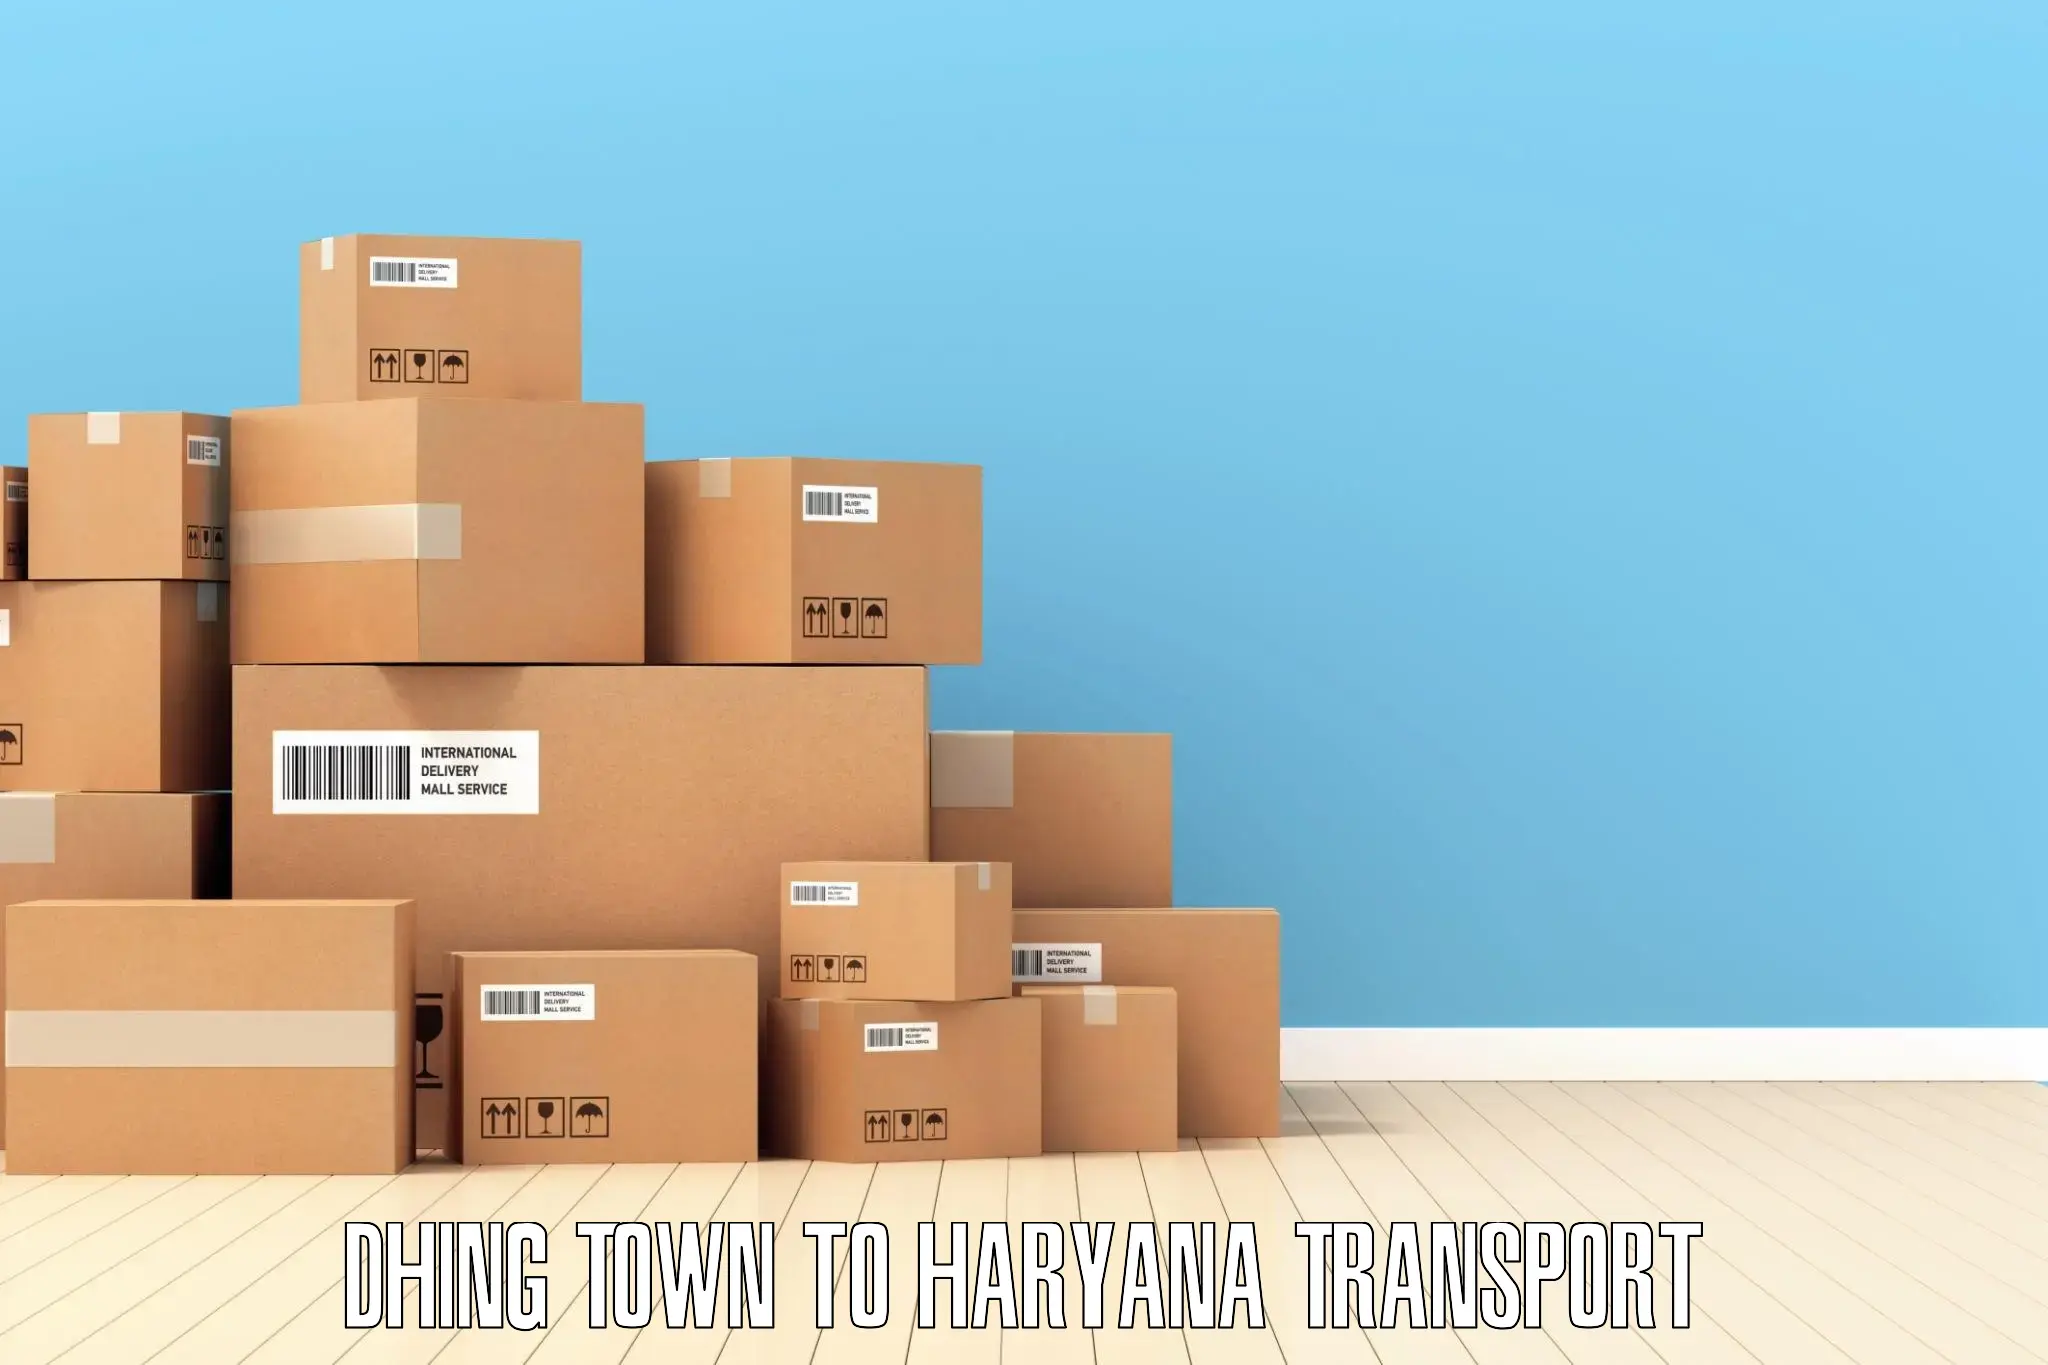 Goods delivery service Dhing Town to Gurugram